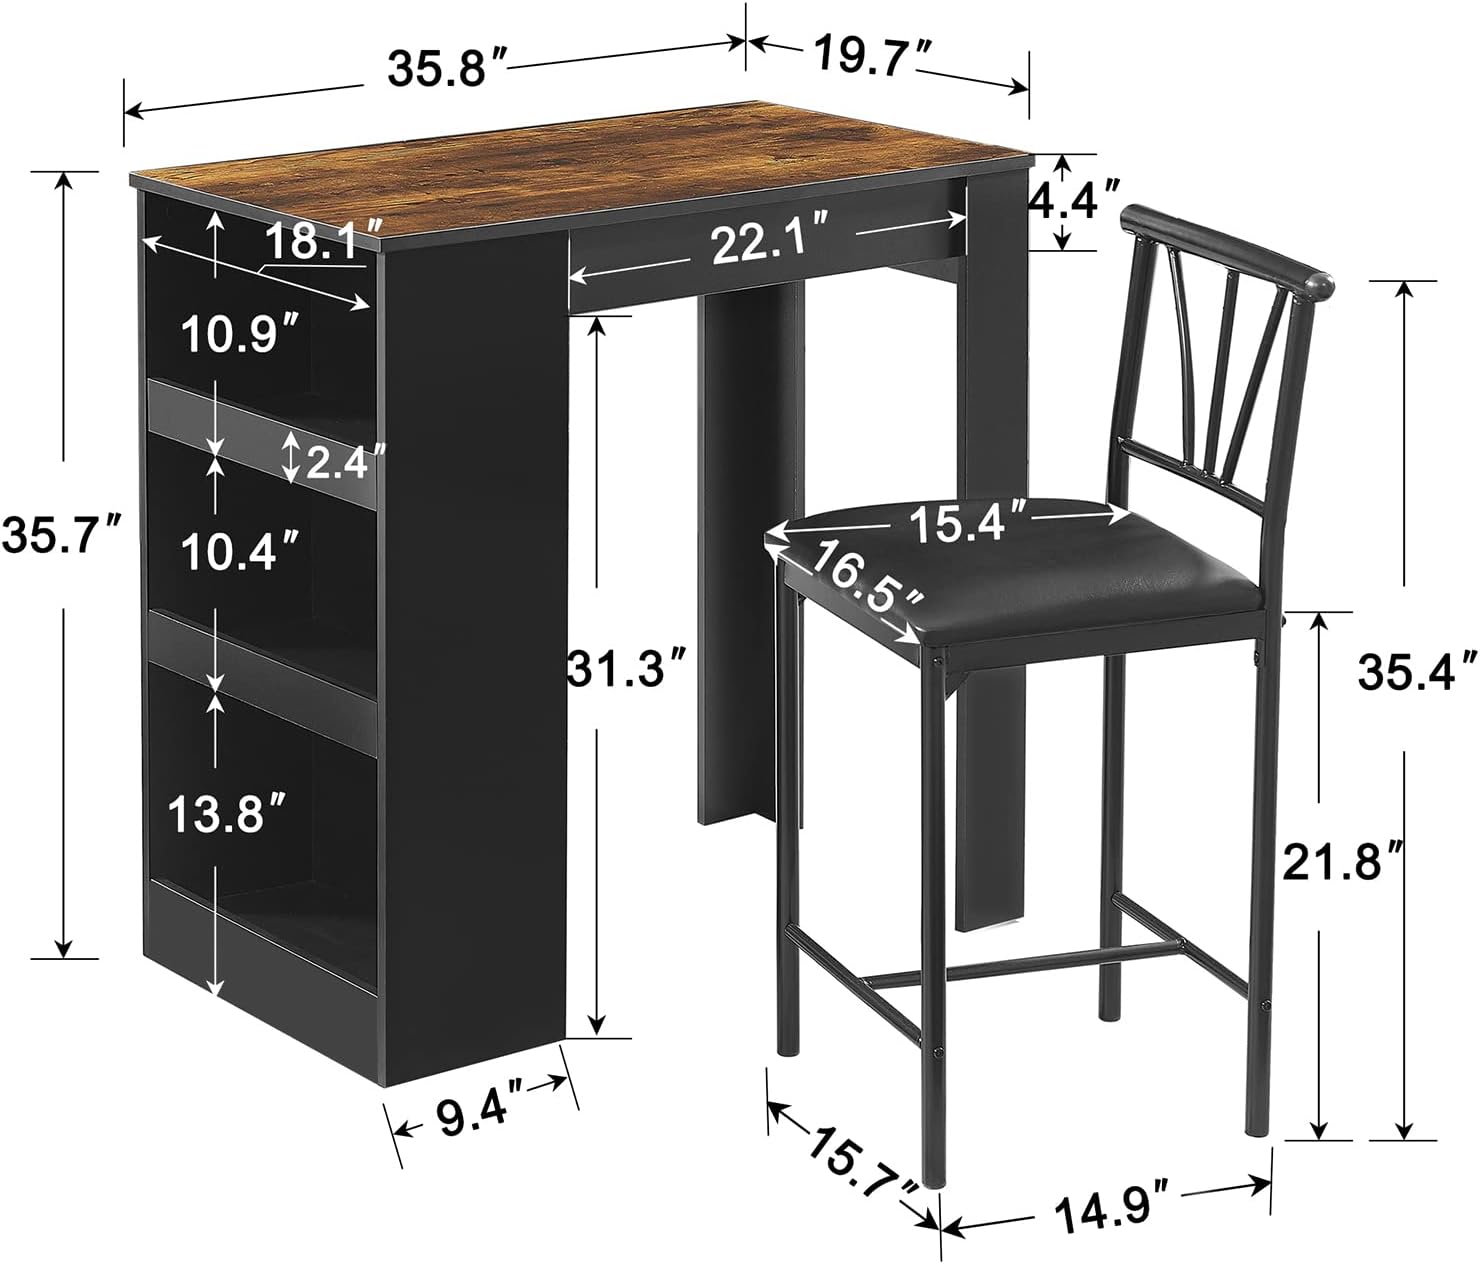 VECELO Small Bar Table and Chairs Tall Kitchen Breakfast Nook with Stools/Dining Set for 2